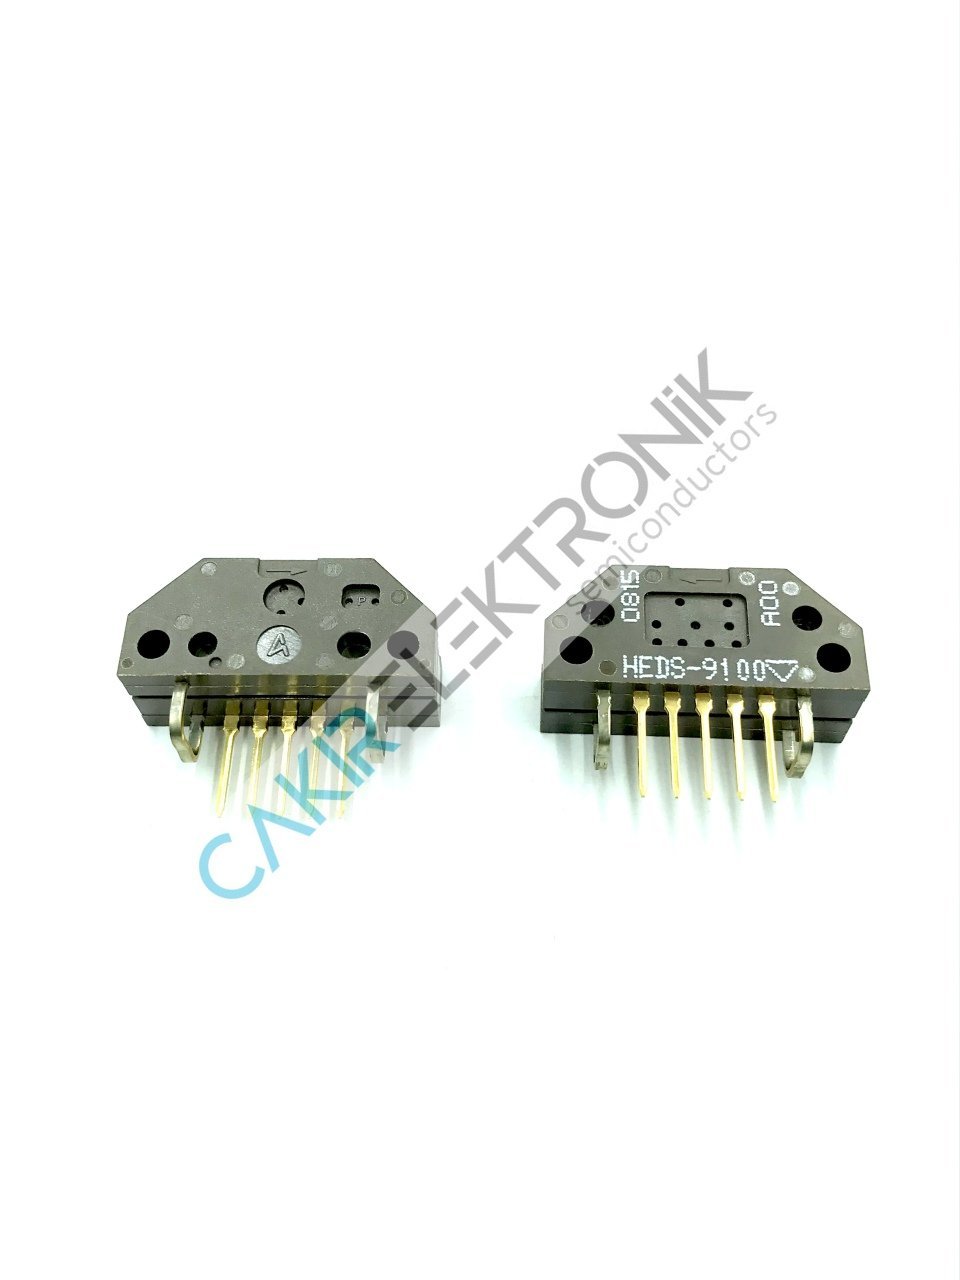 HEDS-9100 , HEDS9100 , HEDS9100#A00 Two Channel Optical Incremental Encoder Modules